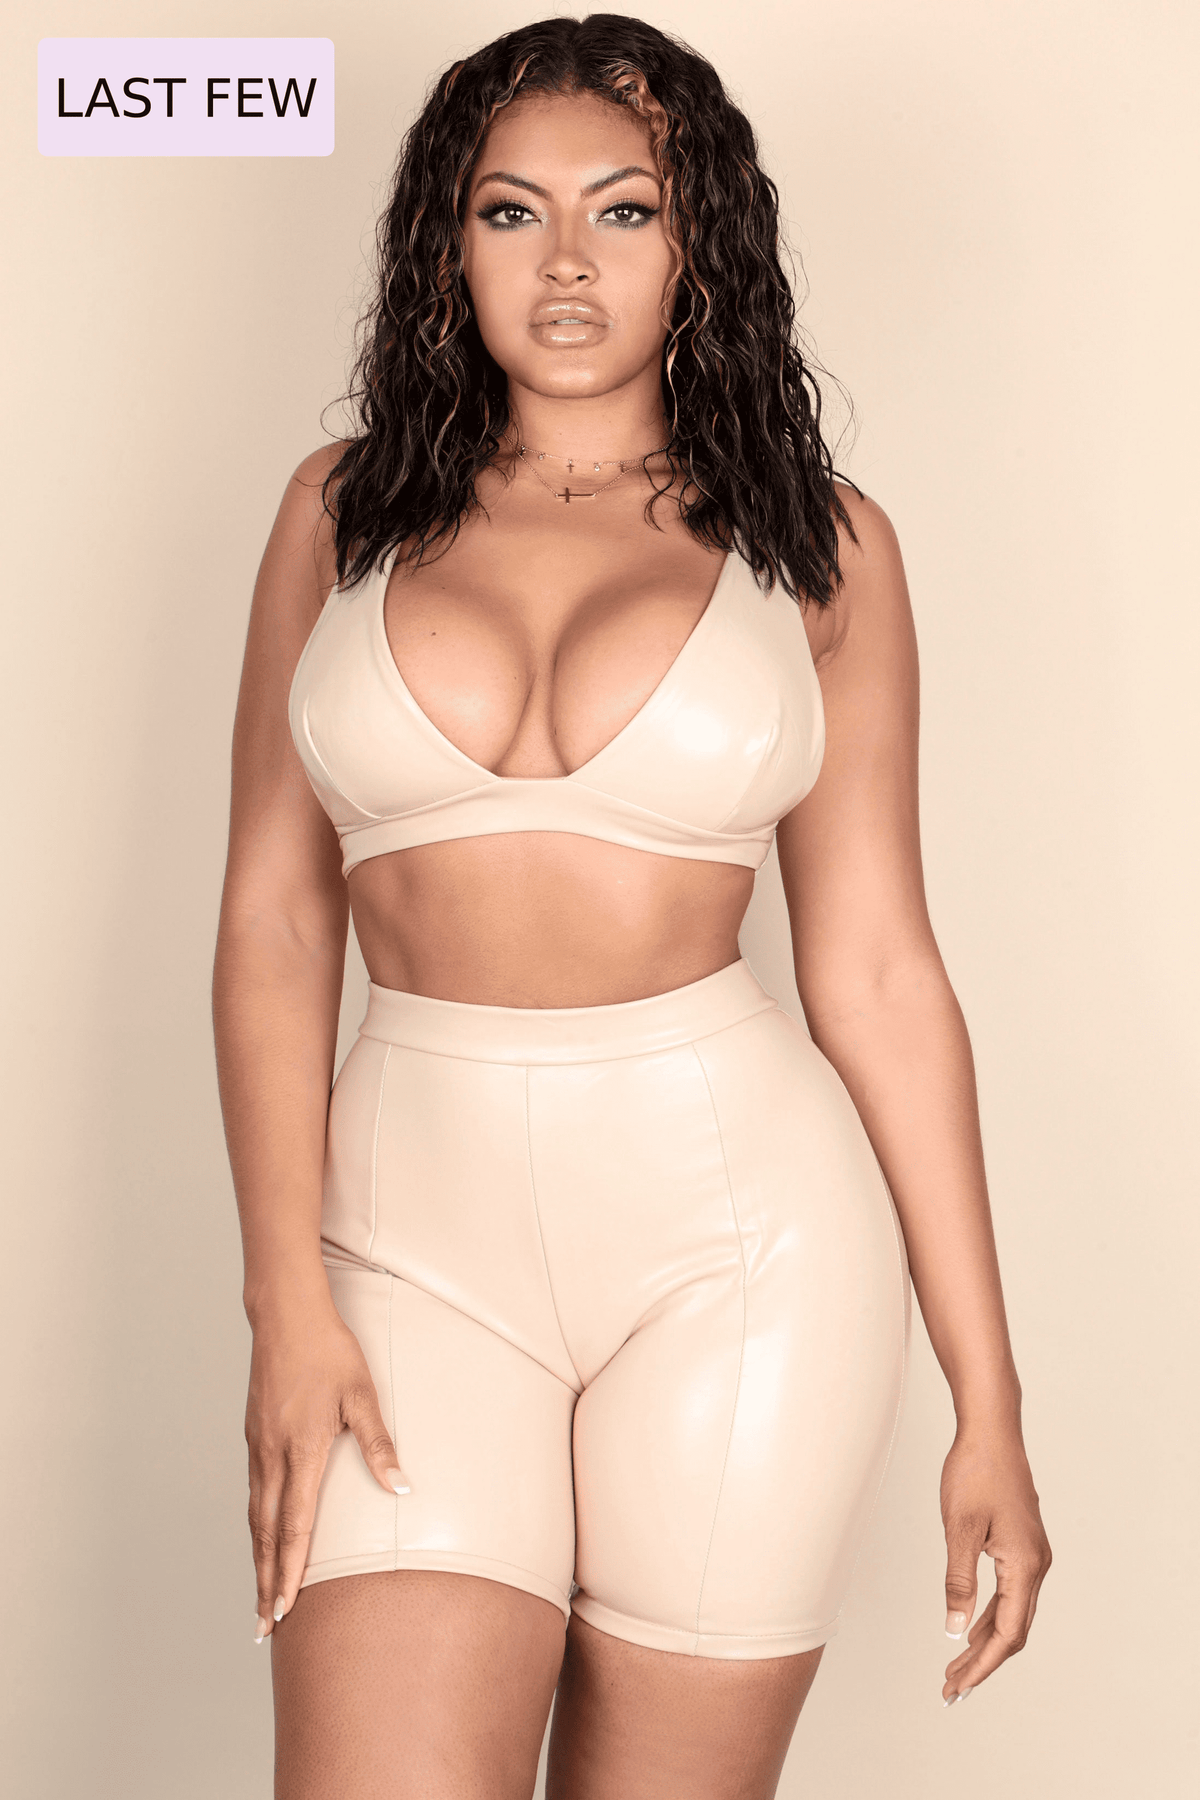 nude beige champagne vegan leather deep-v two piece set biker shorts back clasp closure adjustable straps wholesale retail shopping online boutique forever 21 fashionnova shein boohoo missguided love lust club clubbing bar dayclub boo babe honey sugar girlfriend wife beige 